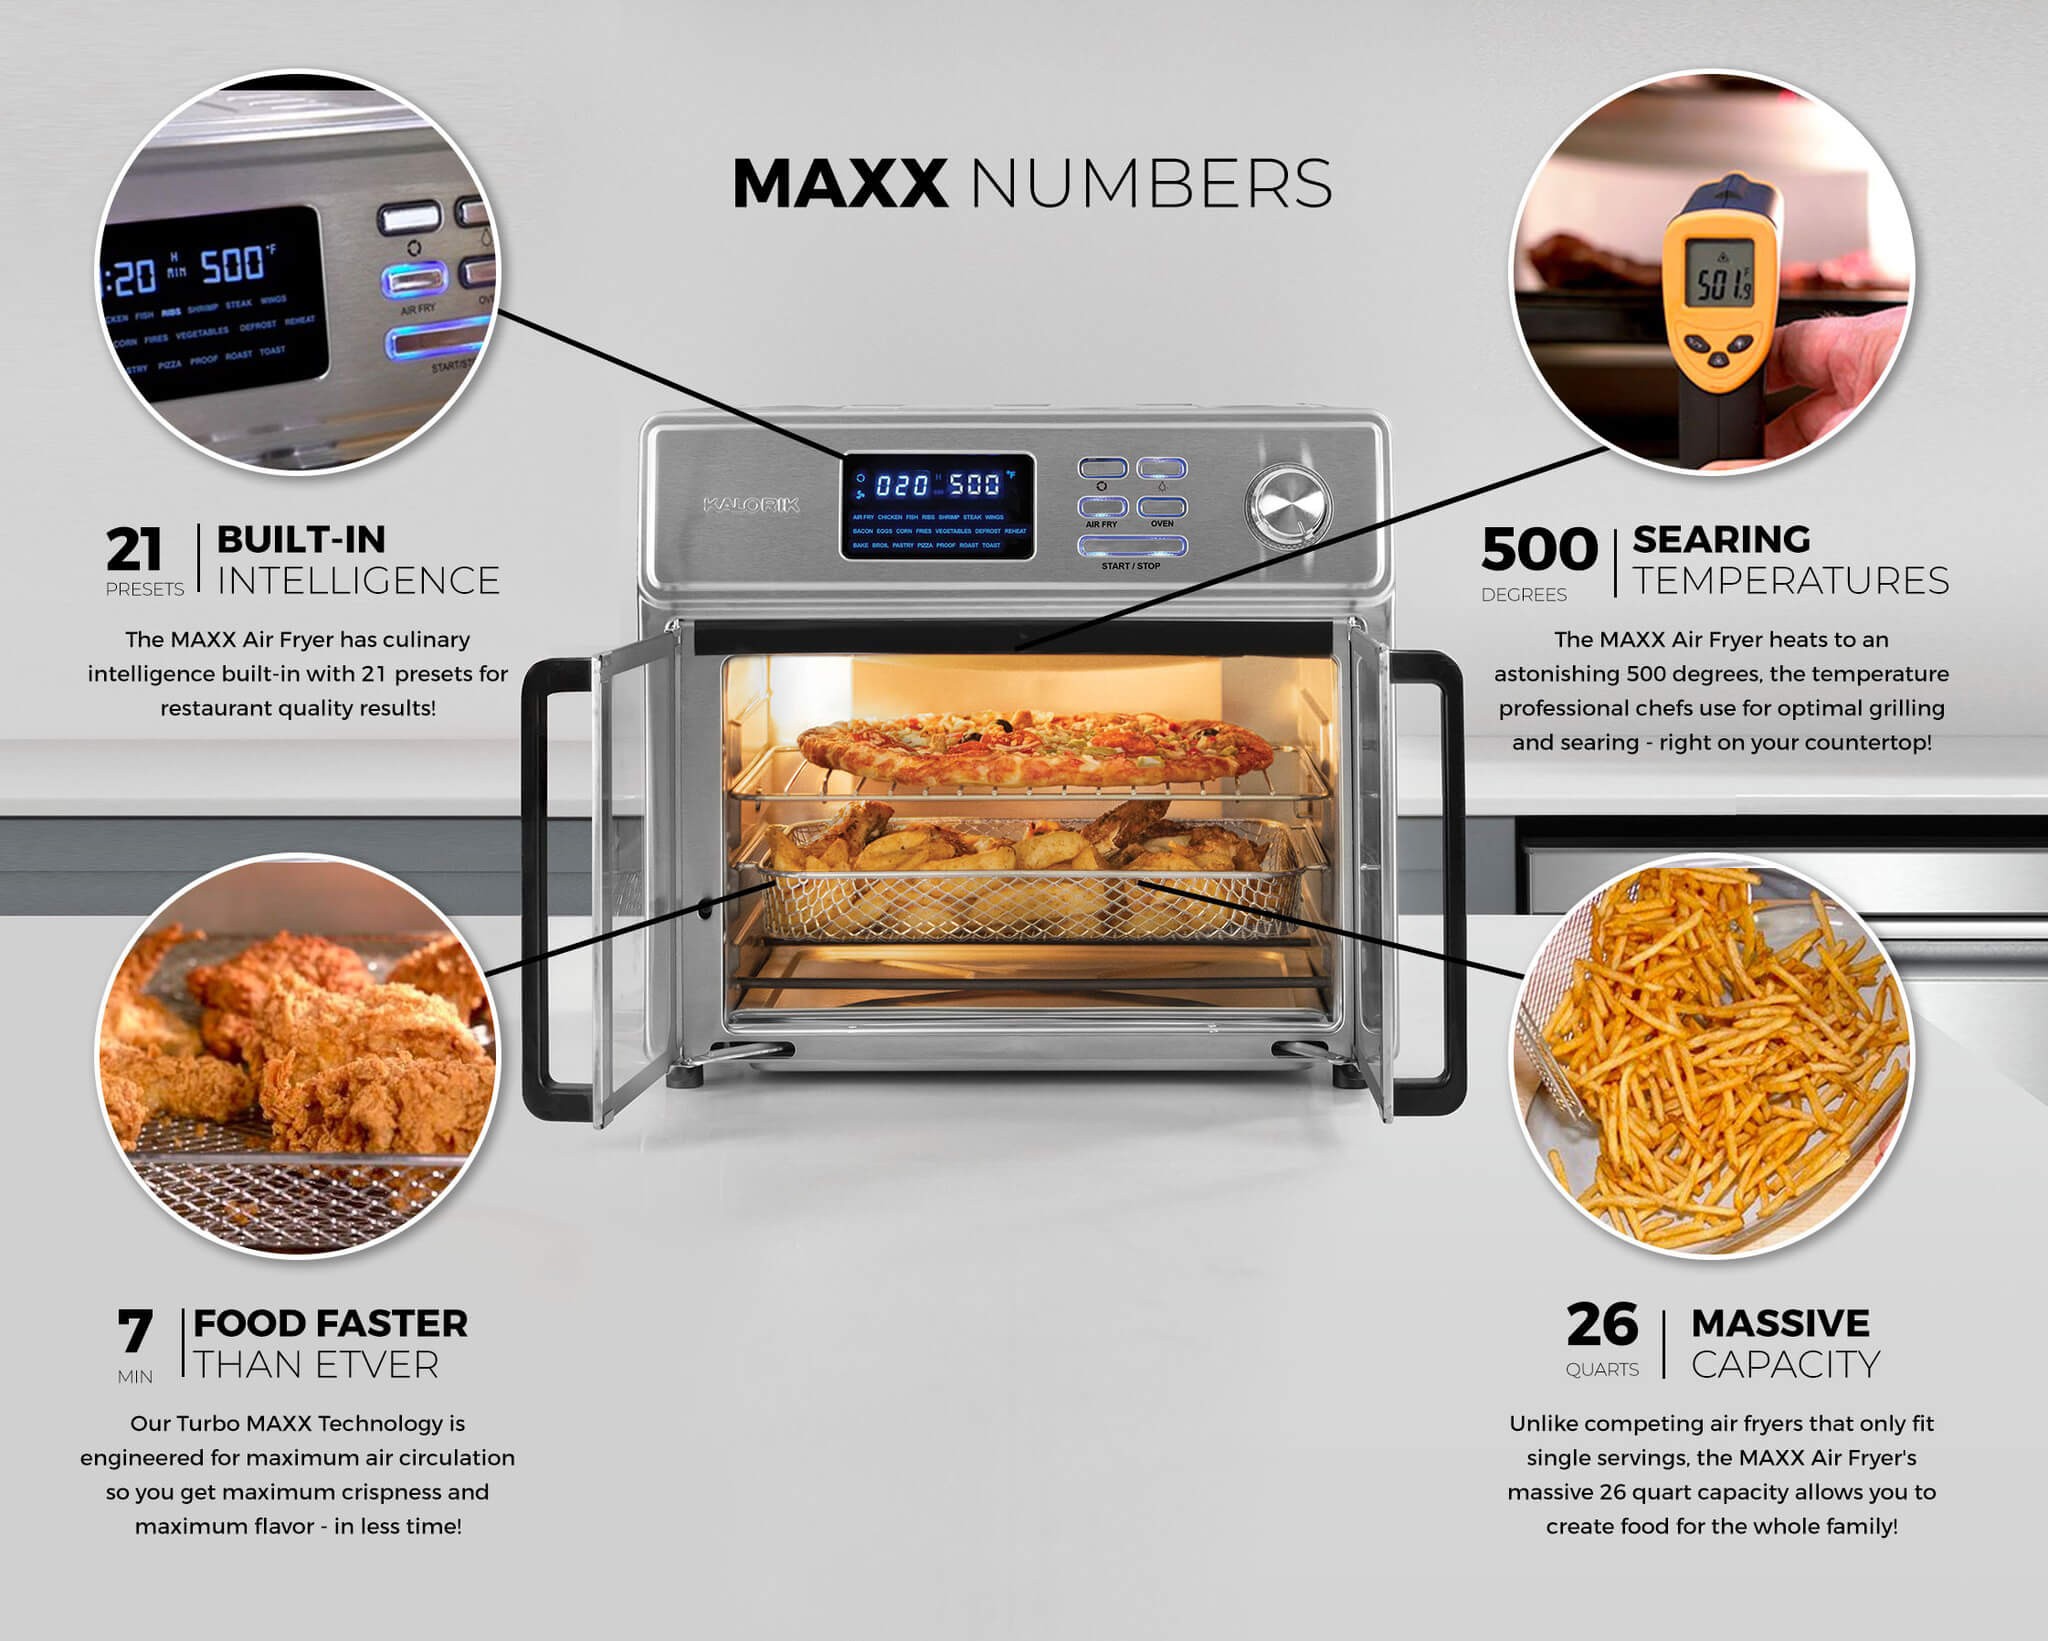 BUILT-IN INTELLIGENCE The MAXX, Air Fryer has culinary intelligence built-in with 21 presets for restaurant quality results, SEARING TEMPERATURES, The MAXX Air Fryer heats to an astonishing 500 degrees, the temperature professional chefs use for optimal grilling and searing - right on your countertop, FOOD FASTER THAN EVER, Our Turbo MAXX Technology is engineered for maximum air circulation so you get maximum crispness and maximum flavor - in less time, MASSIVE CAPACITY, Unlike competing air fryers that only fit single servings, the MAXX Air Fryer's massive 26 quart capacity allows you to create food for the whole family!